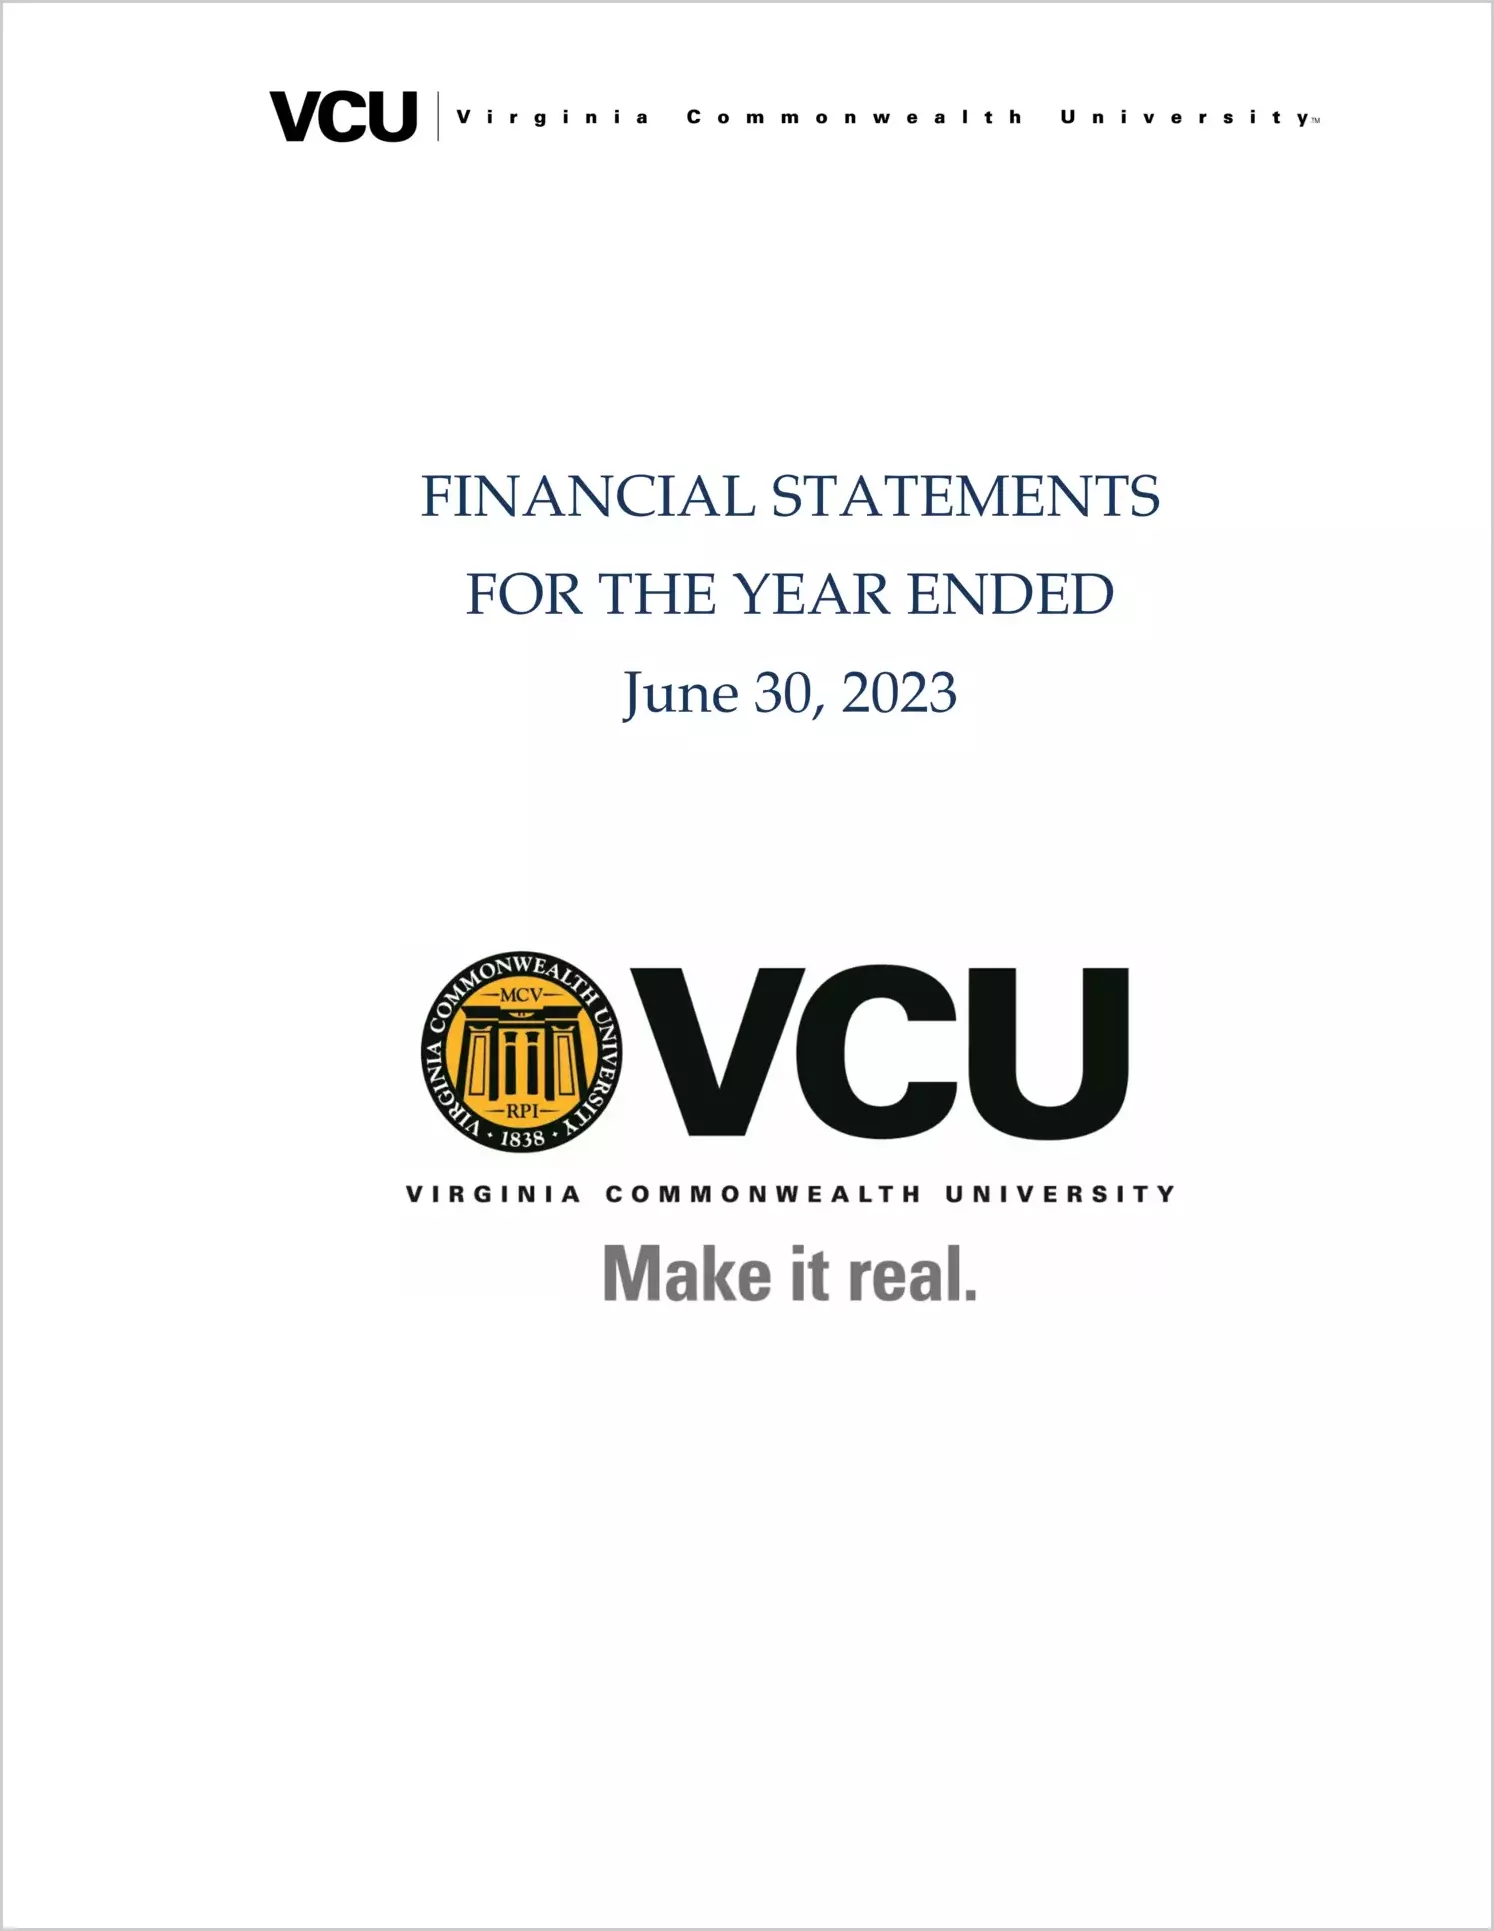 Virginia Commonwealth University Financial Statements for the year ended June 30, 2023